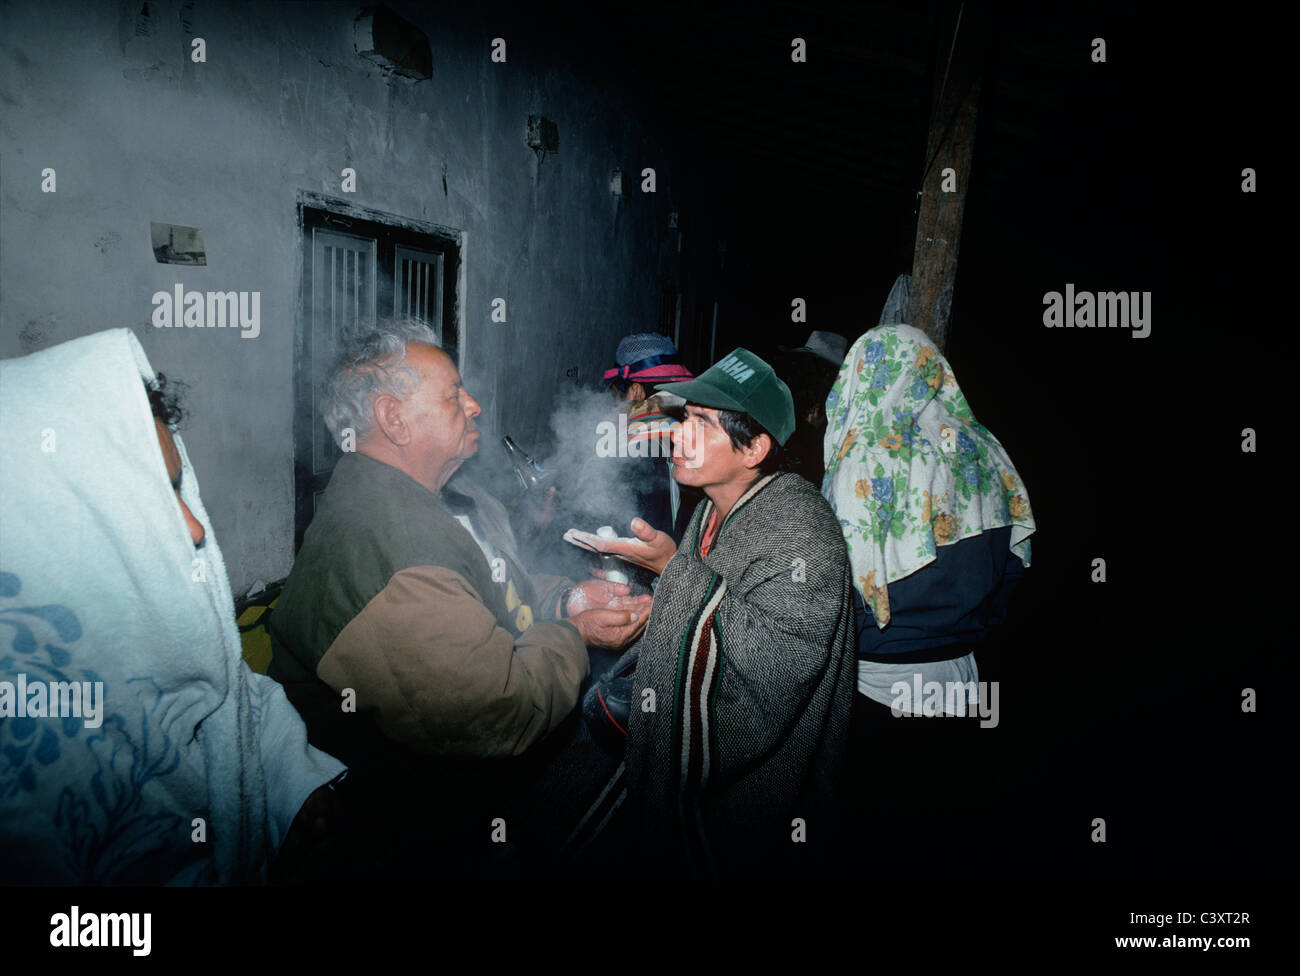 Peruvian folk healer (curandero) blowing a mystical white powder into the face of a man wishing for spiritual cleansing. Stock Photo